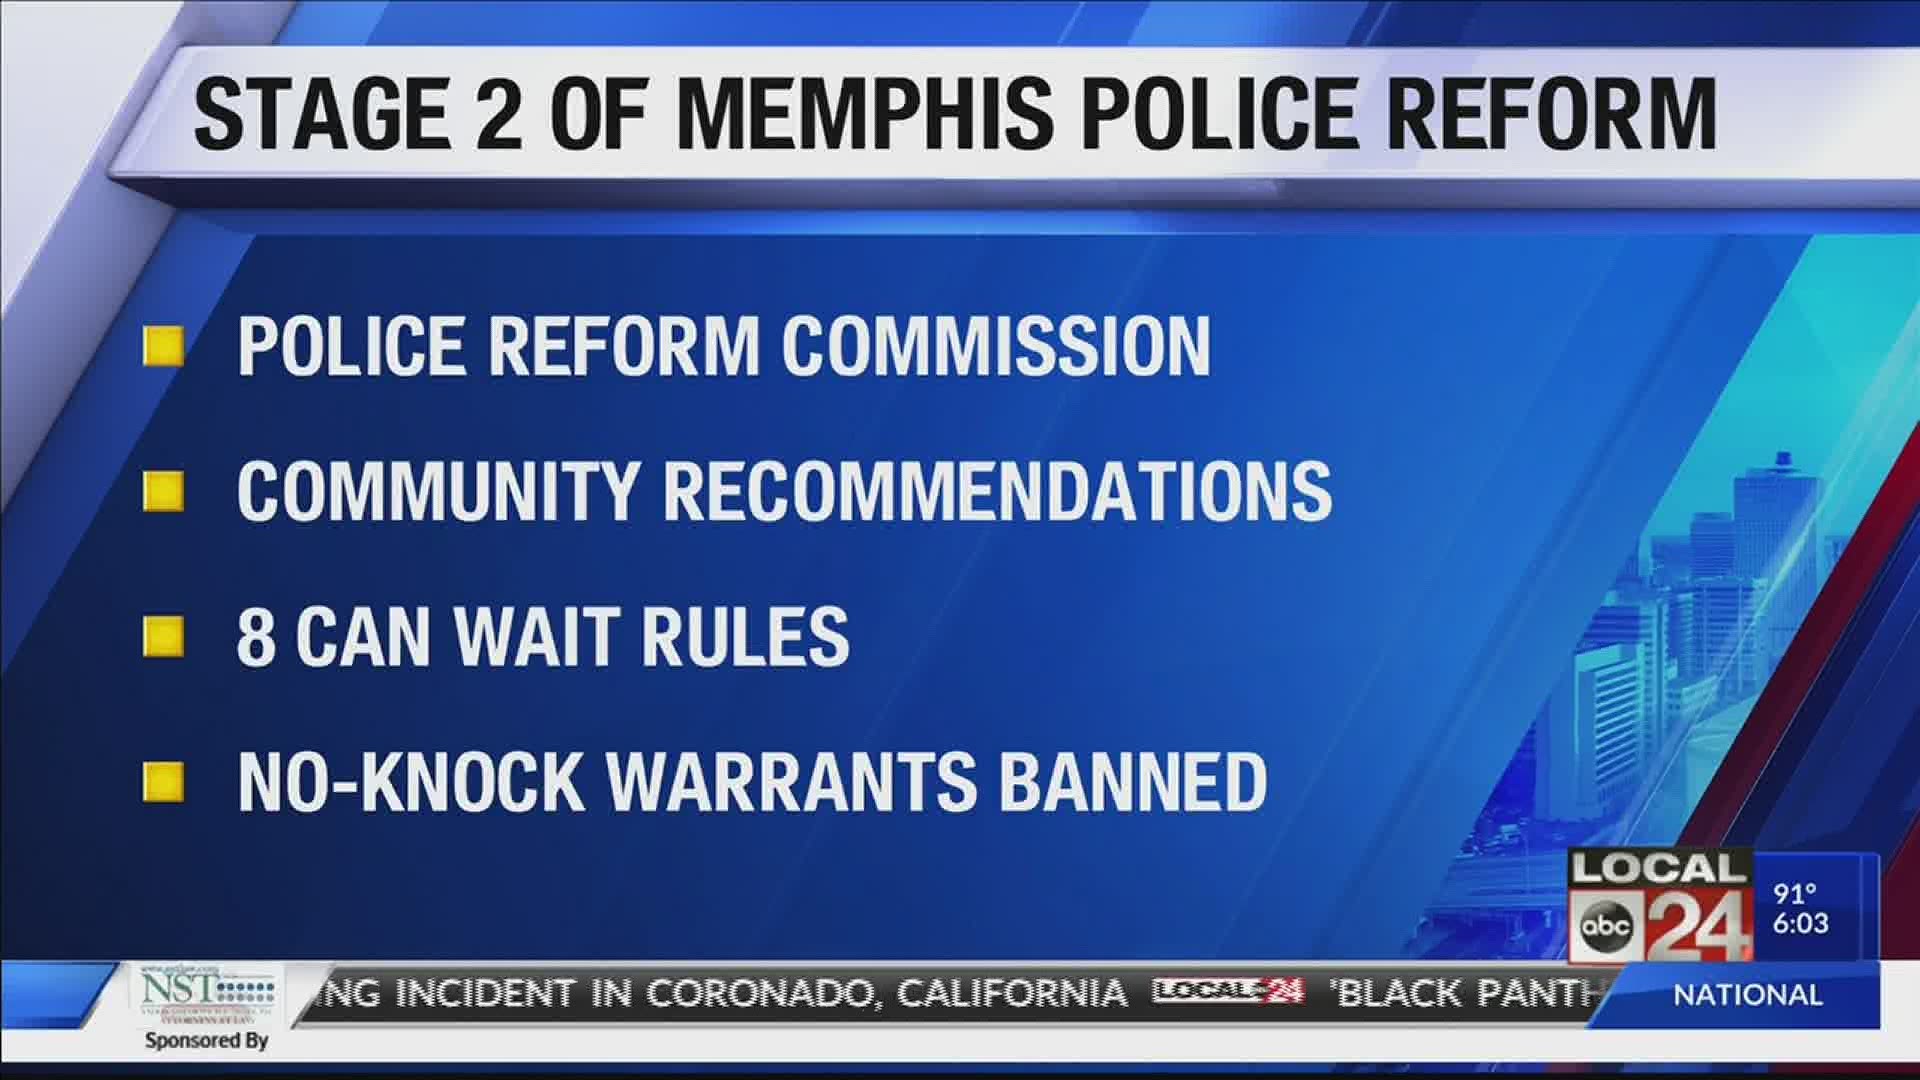 Memphis Mayor Jim Strickland to announce police reform commission next week ahead of Phase 2 of re-imagining policing